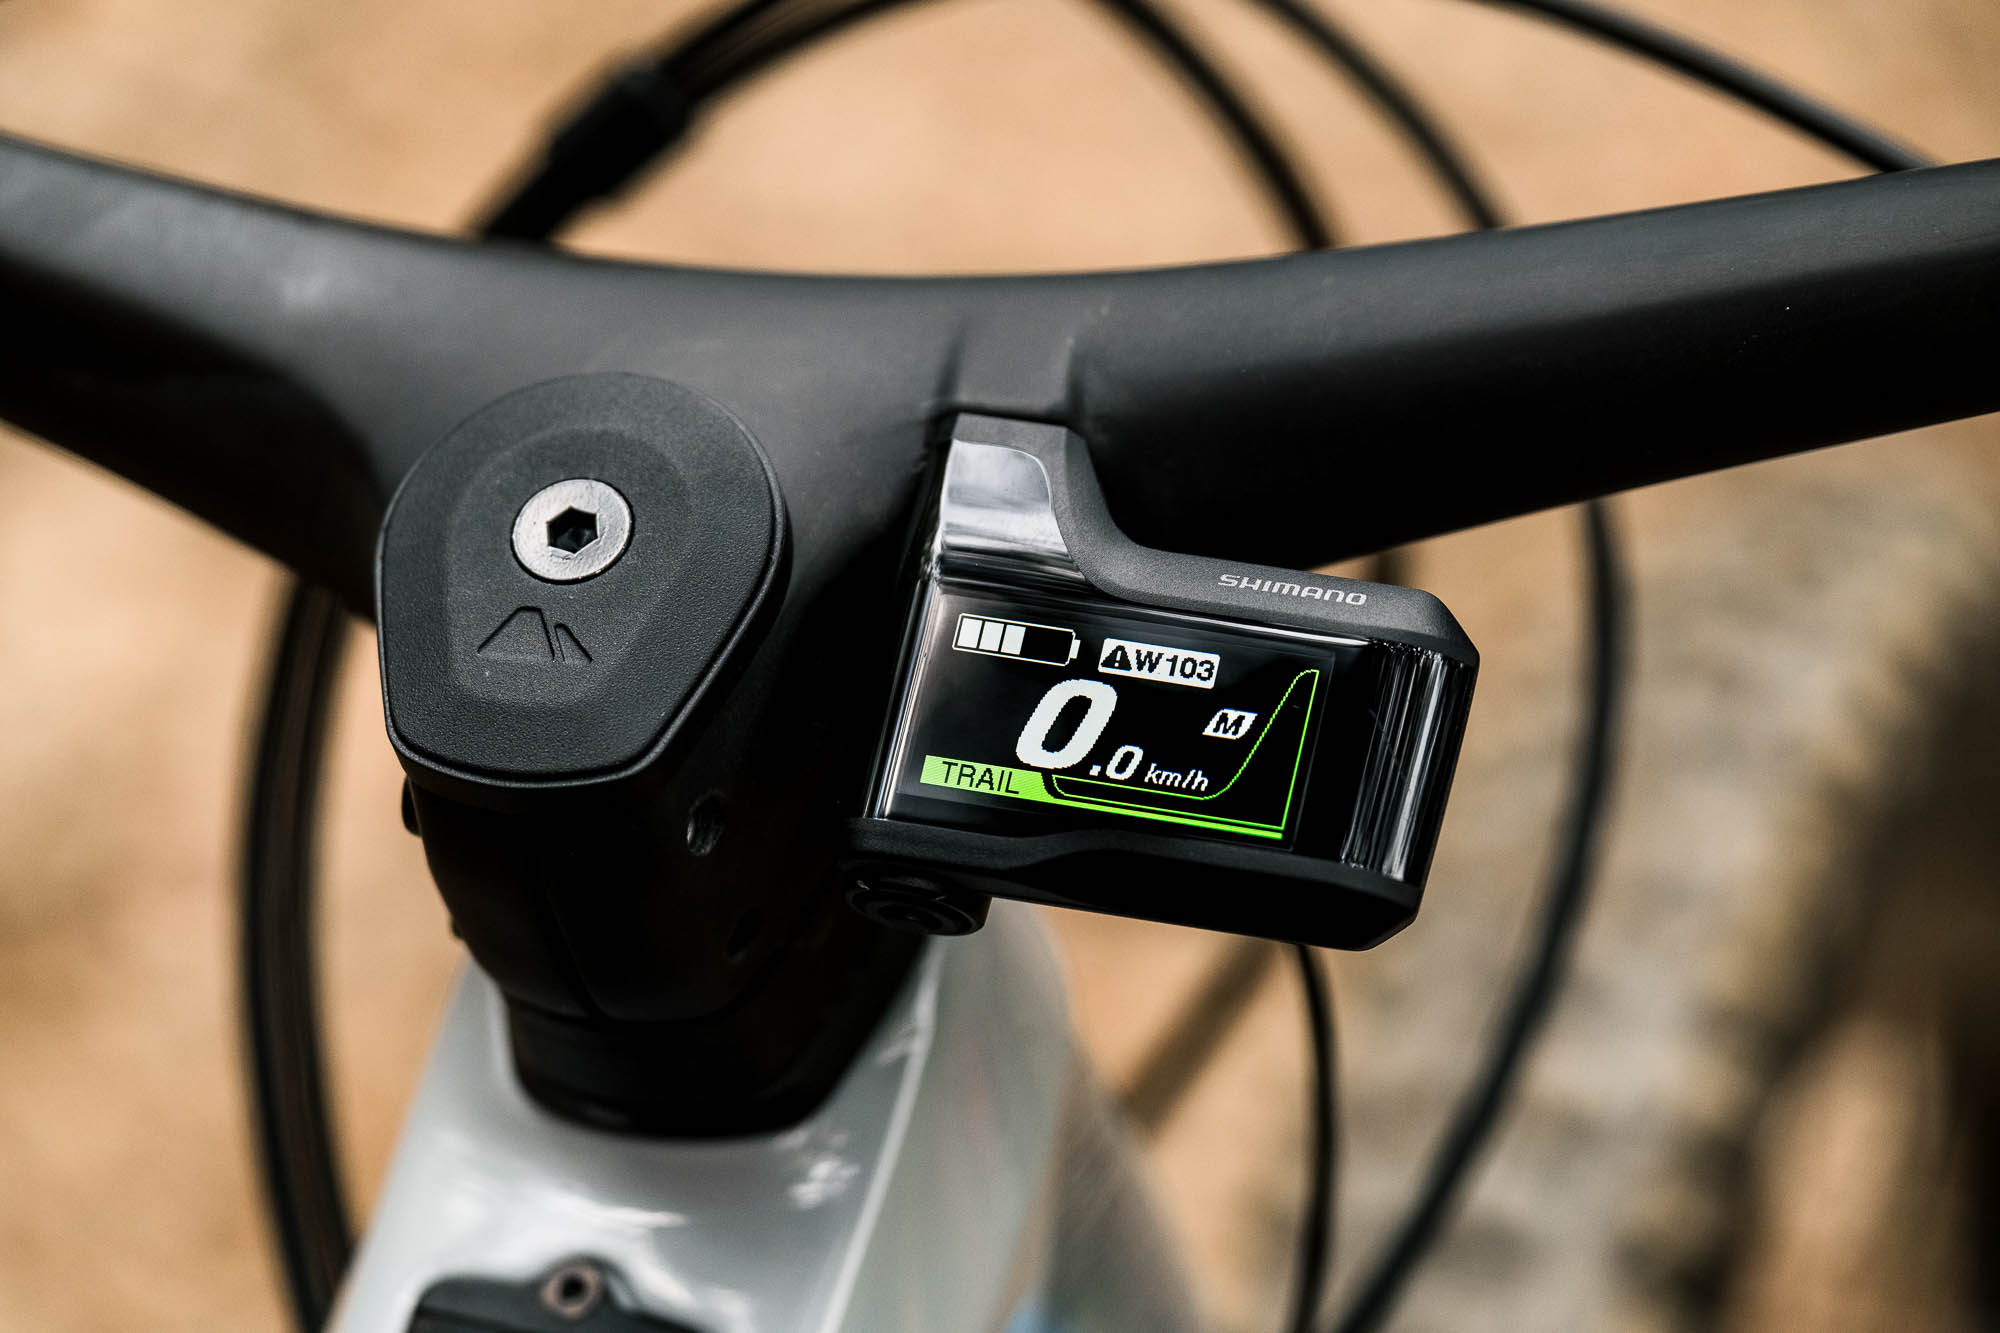 Reset the motor by turning off the bike, removing the battery, waiting for a few minutes, and then reinserting the battery and turning the bike back on.
If the motor still doesn't engage, contact Trek customer support for further assistance.